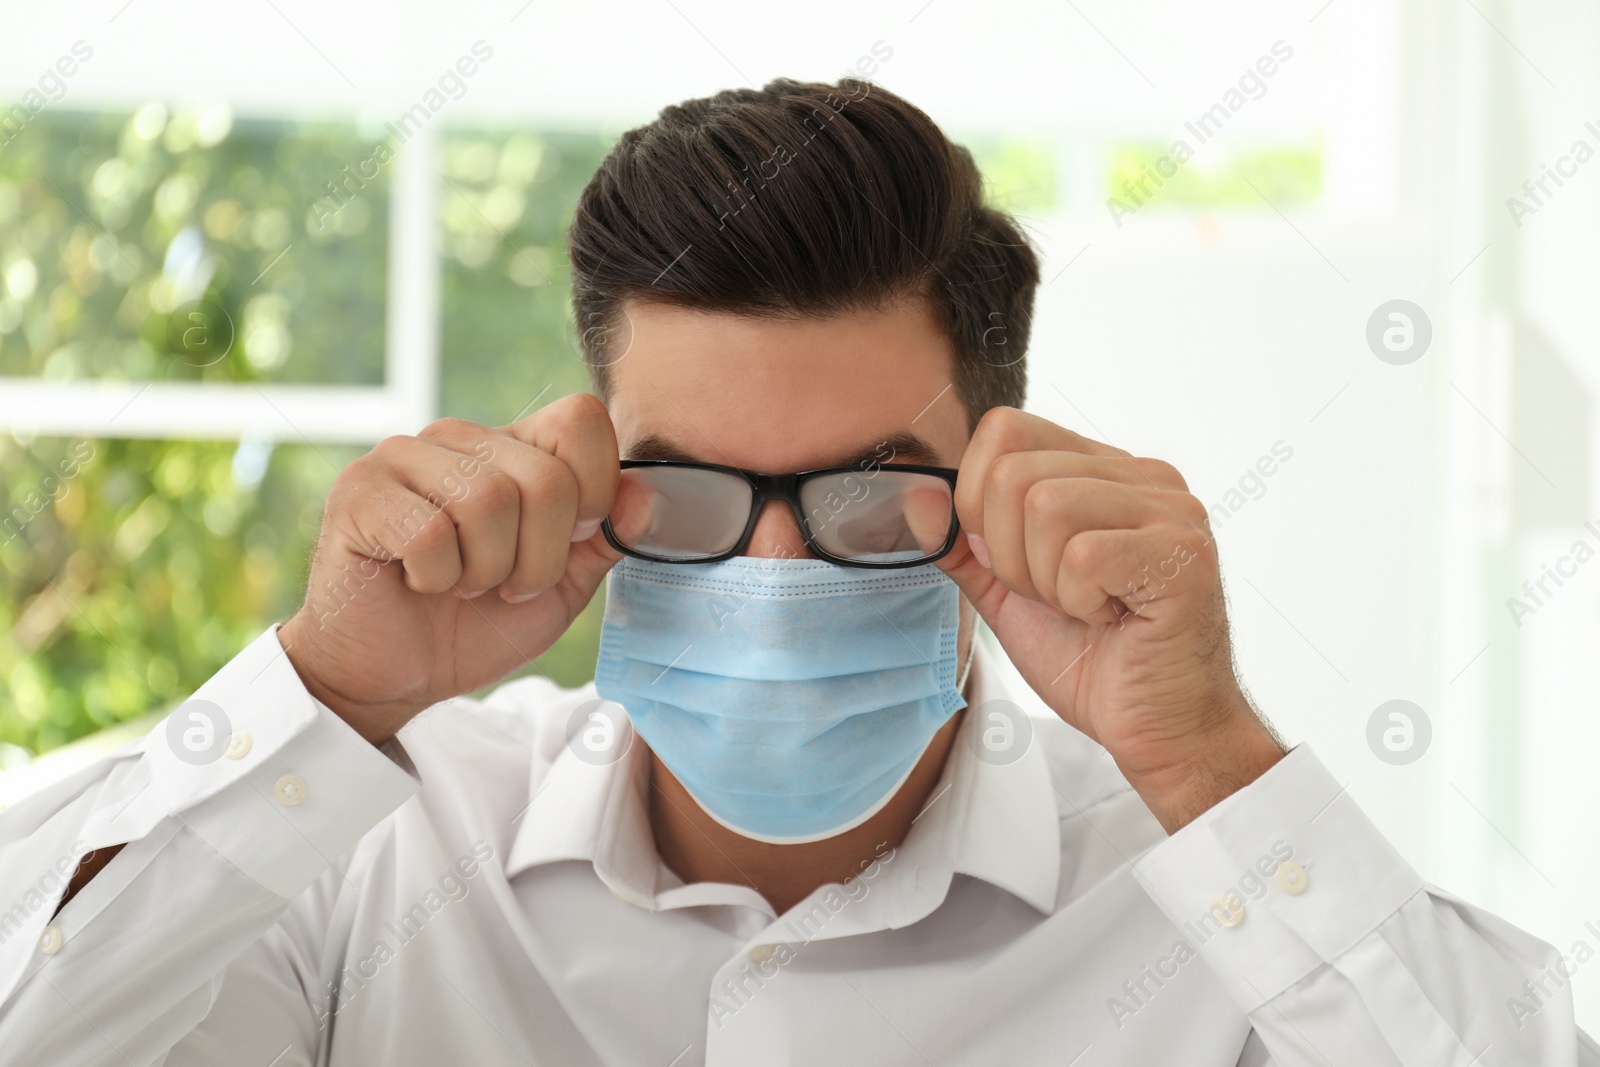 Photo of Man wiping foggy glasses caused by wearing medical mask indoors, closeup